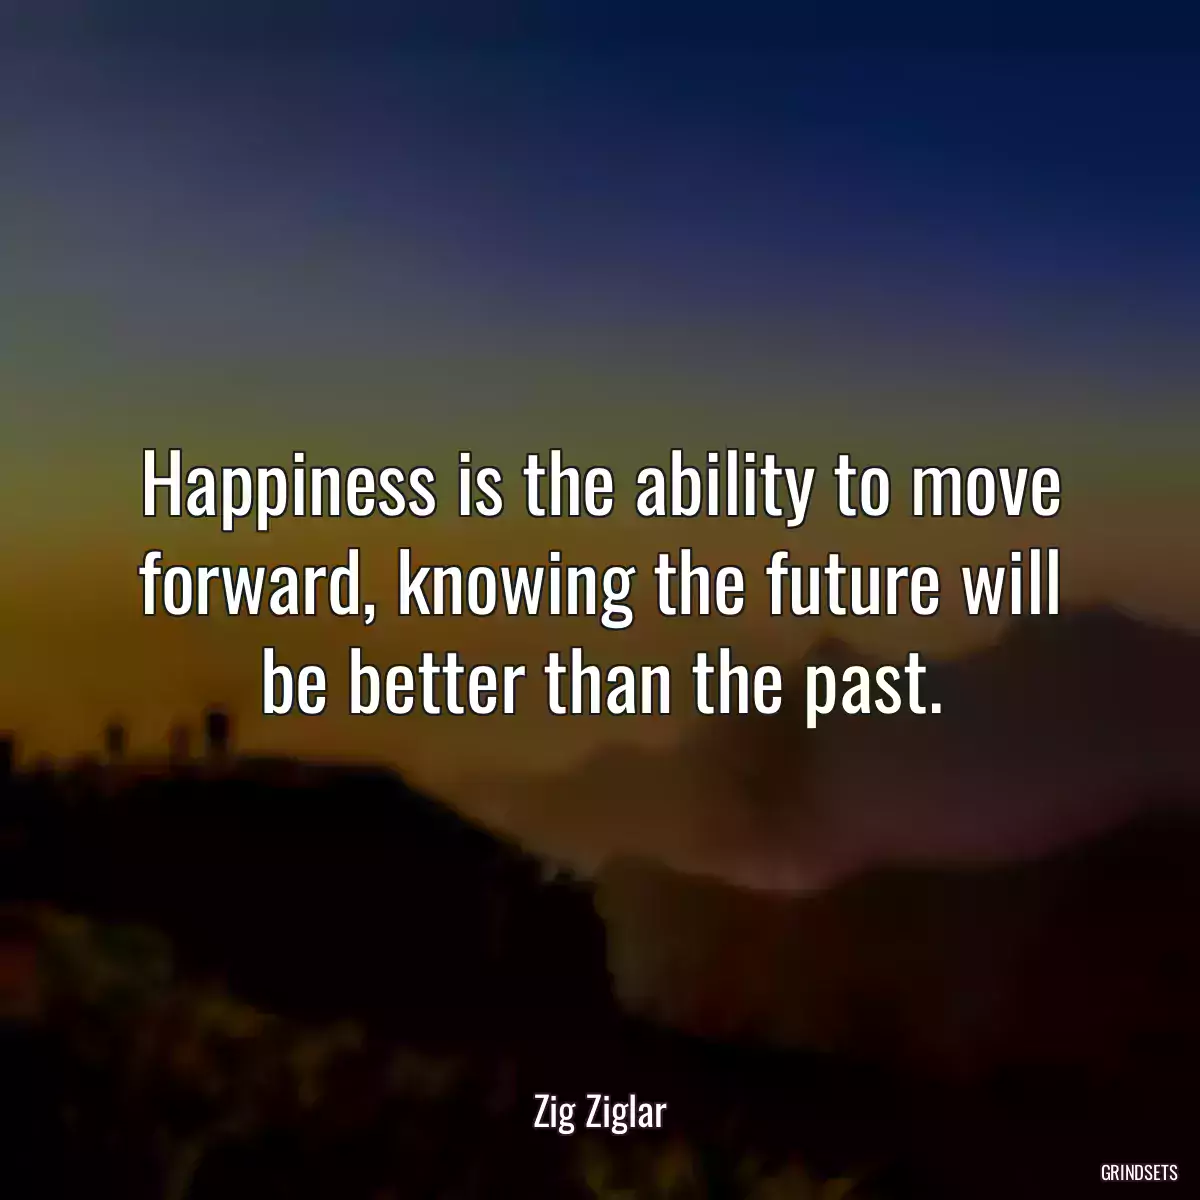 Happiness is the ability to move forward, knowing the future will be better than the past.